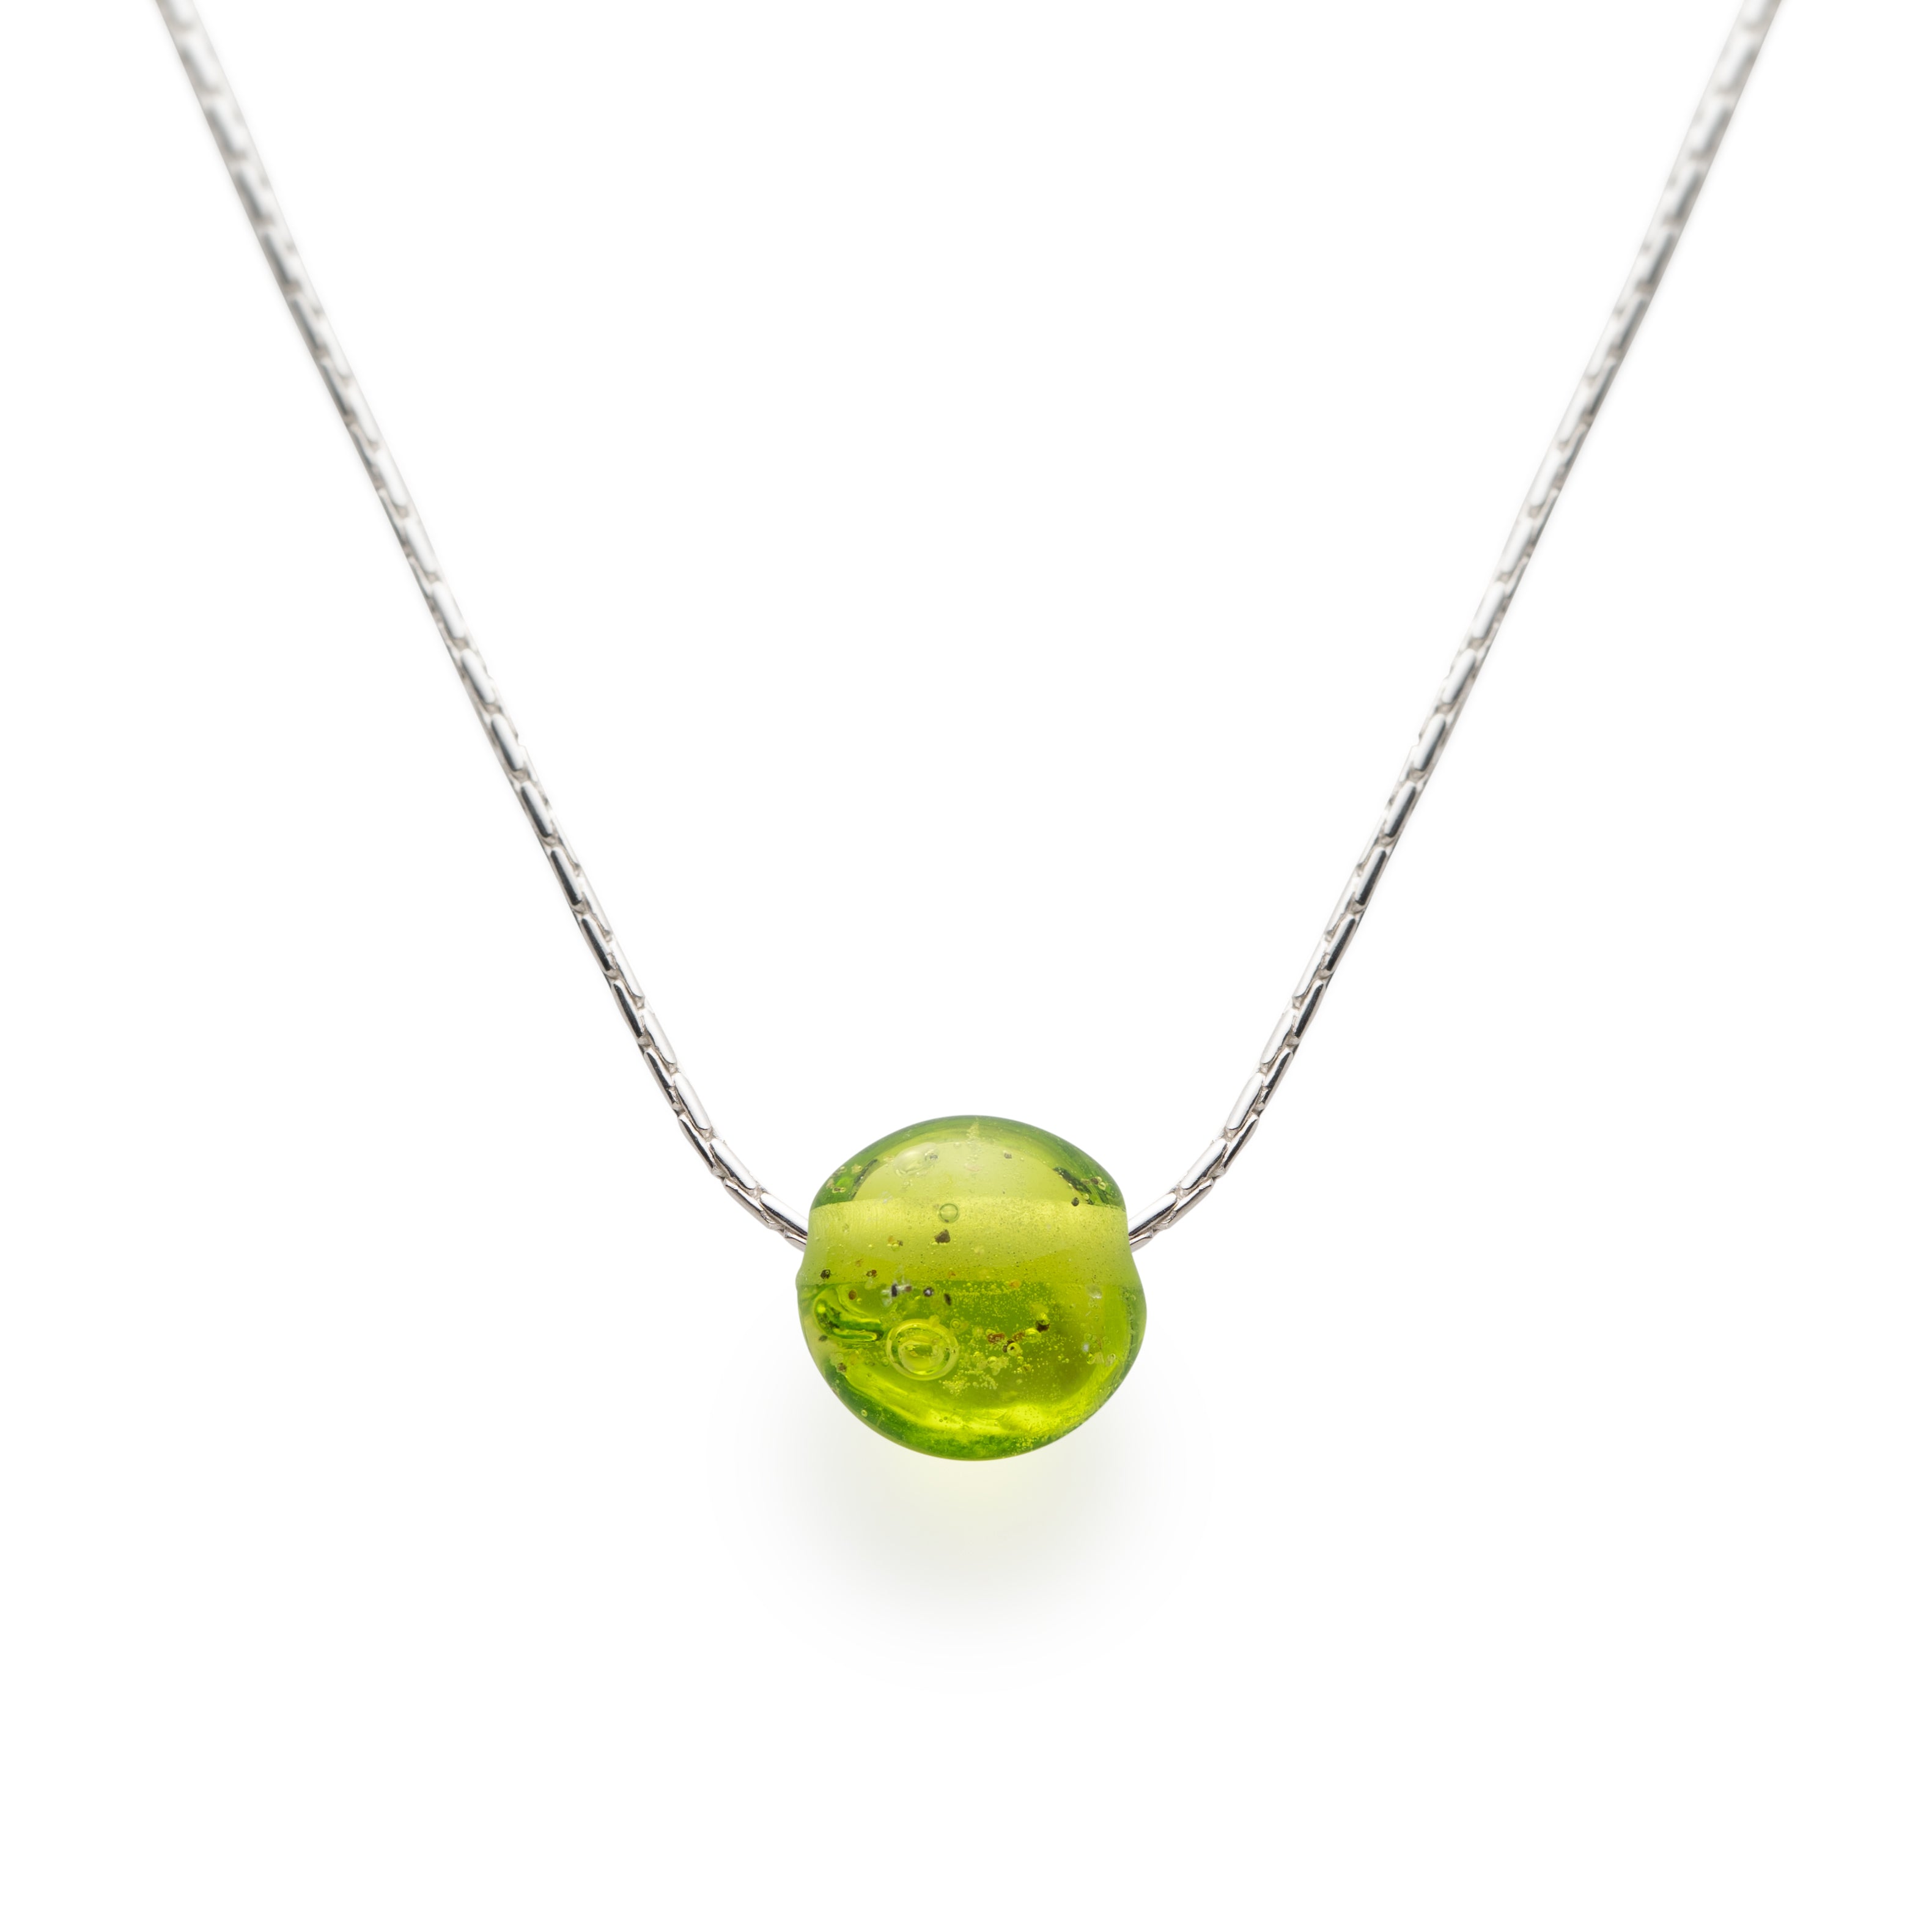 Silver Sand Pebble Necklace - Apple Green